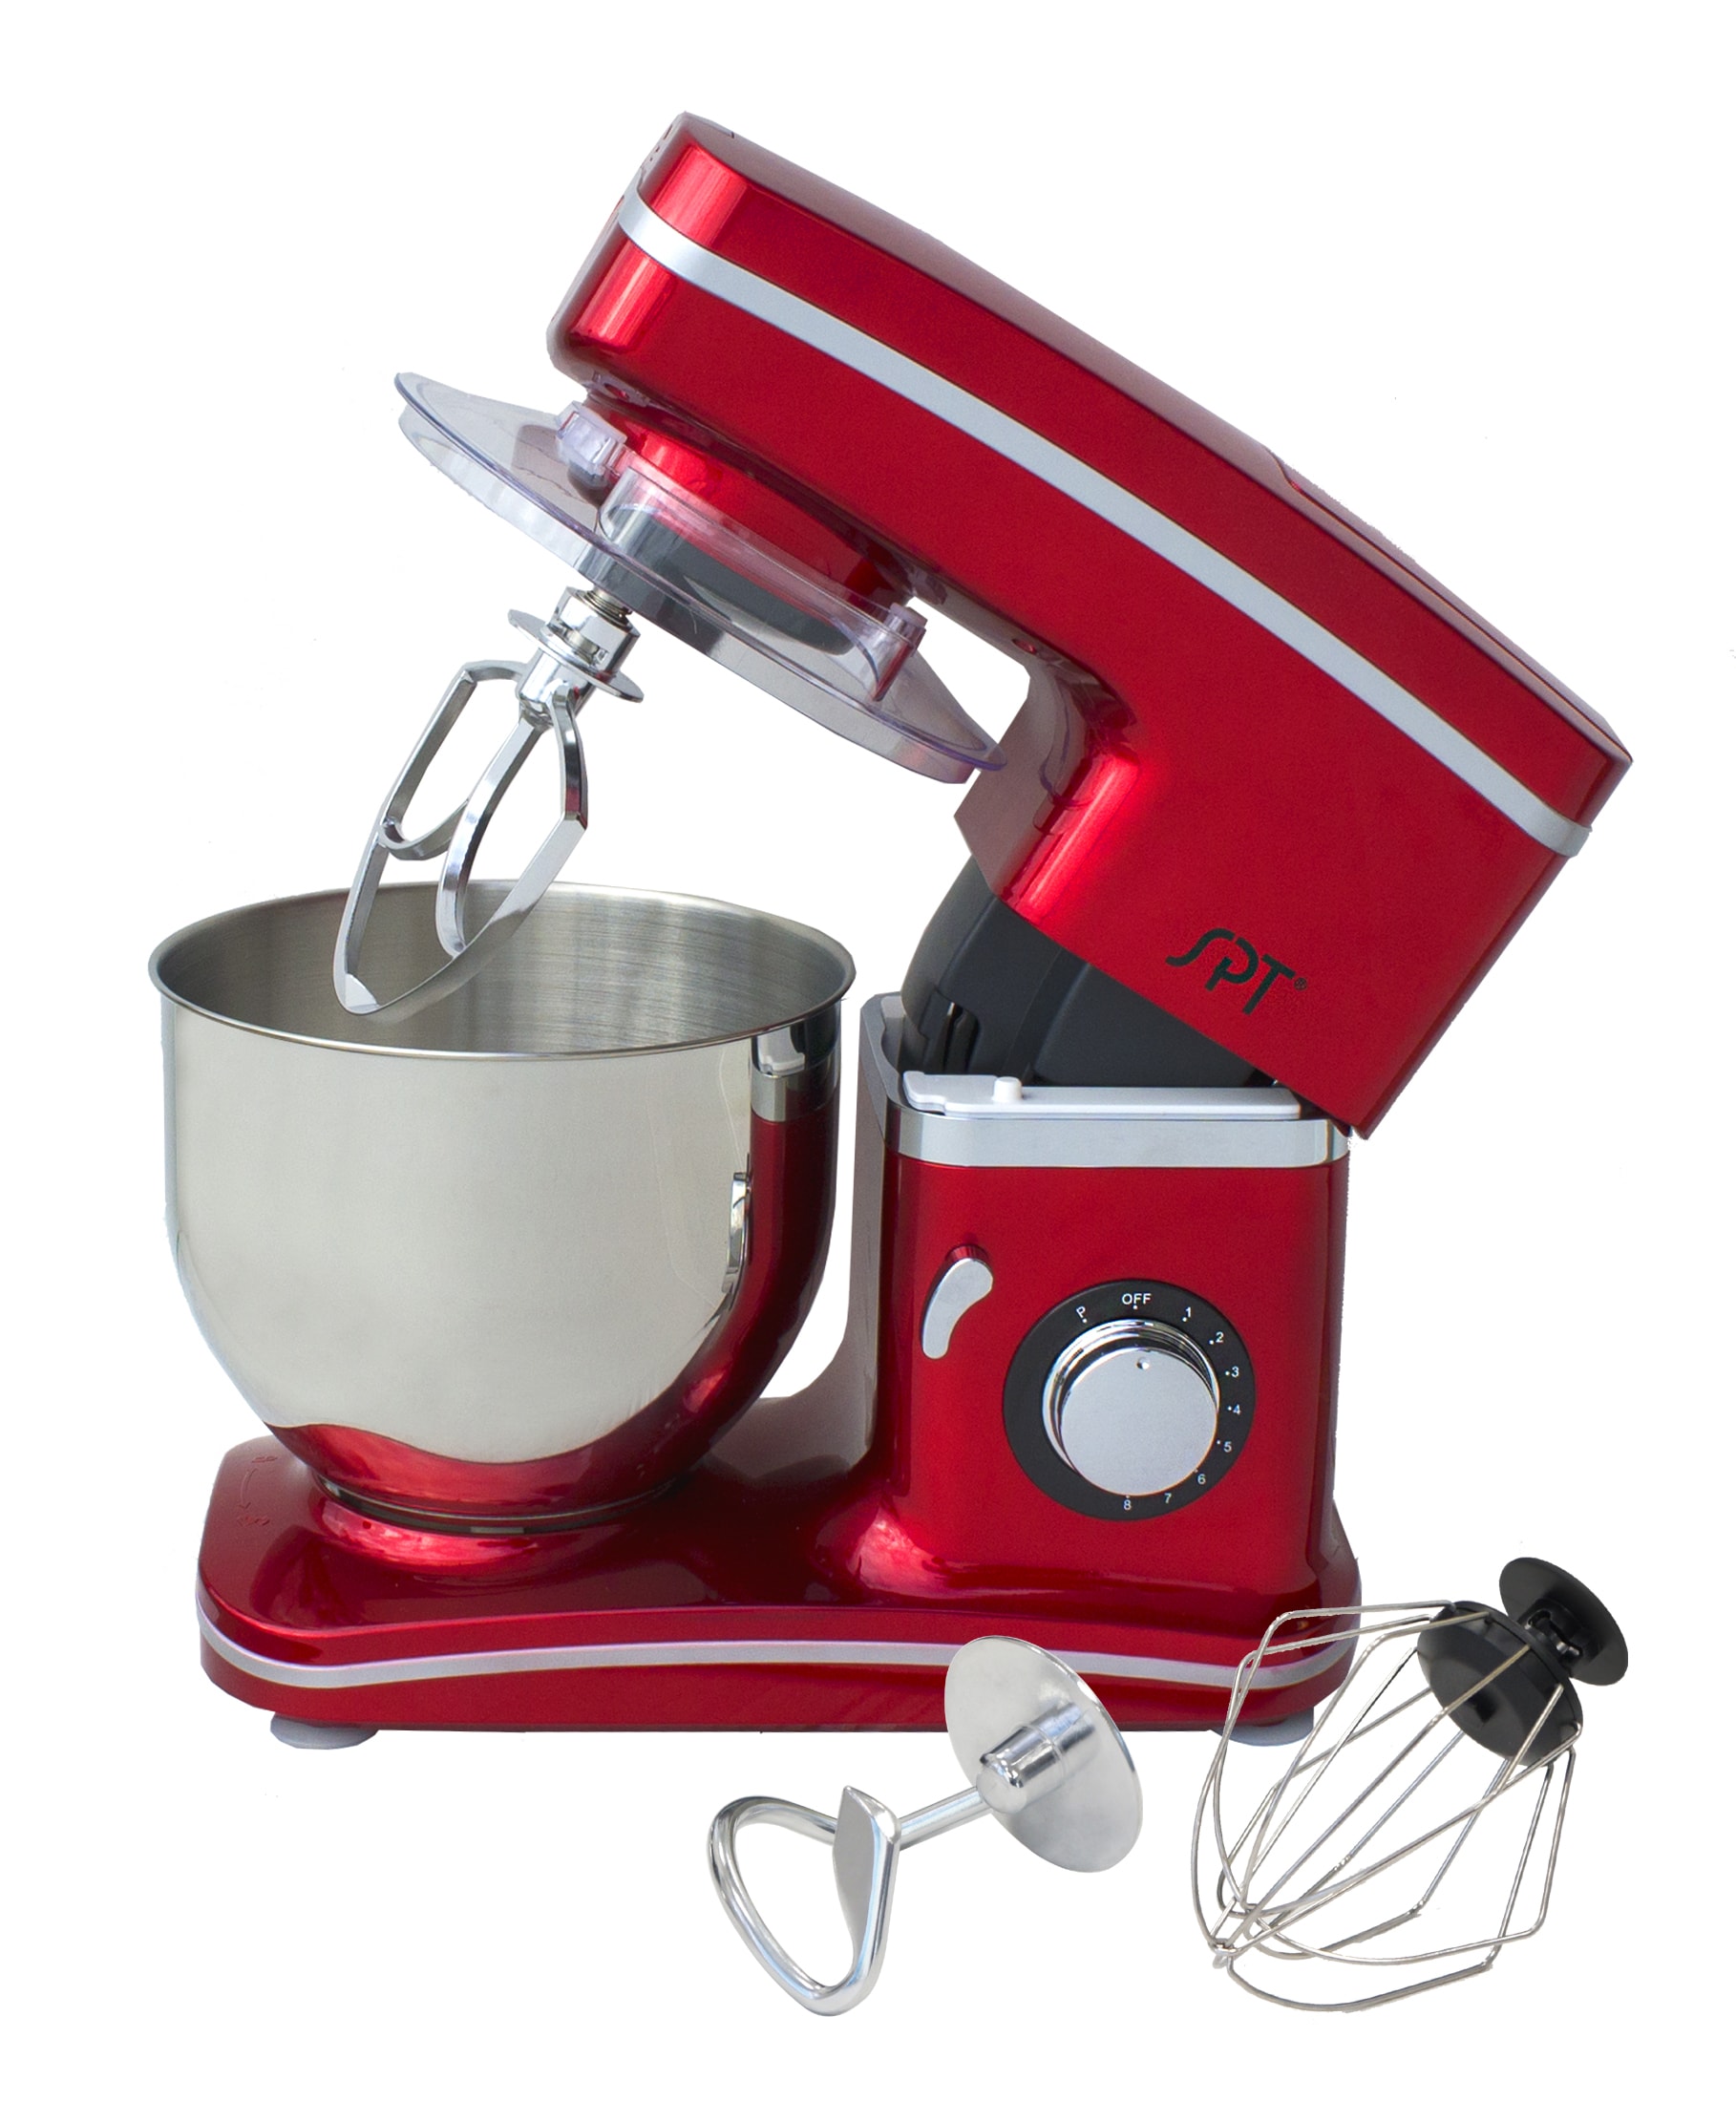 Goplus 7-Quart 6-Speed Red Commercial/Residential Stand Mixer